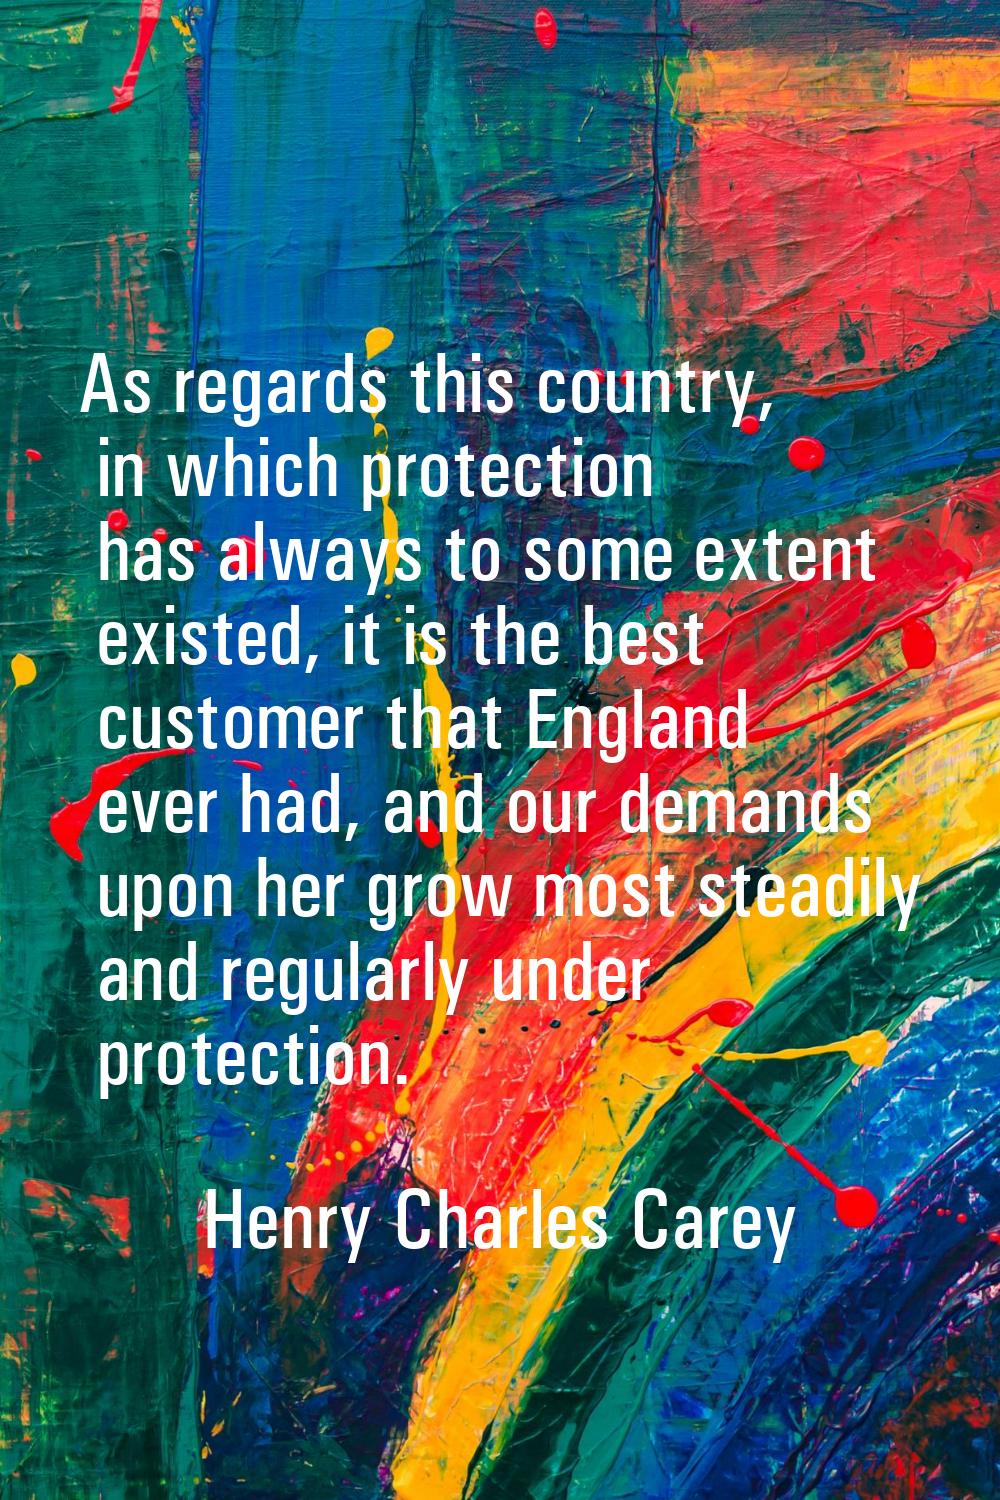 As regards this country, in which protection has always to some extent existed, it is the best cust